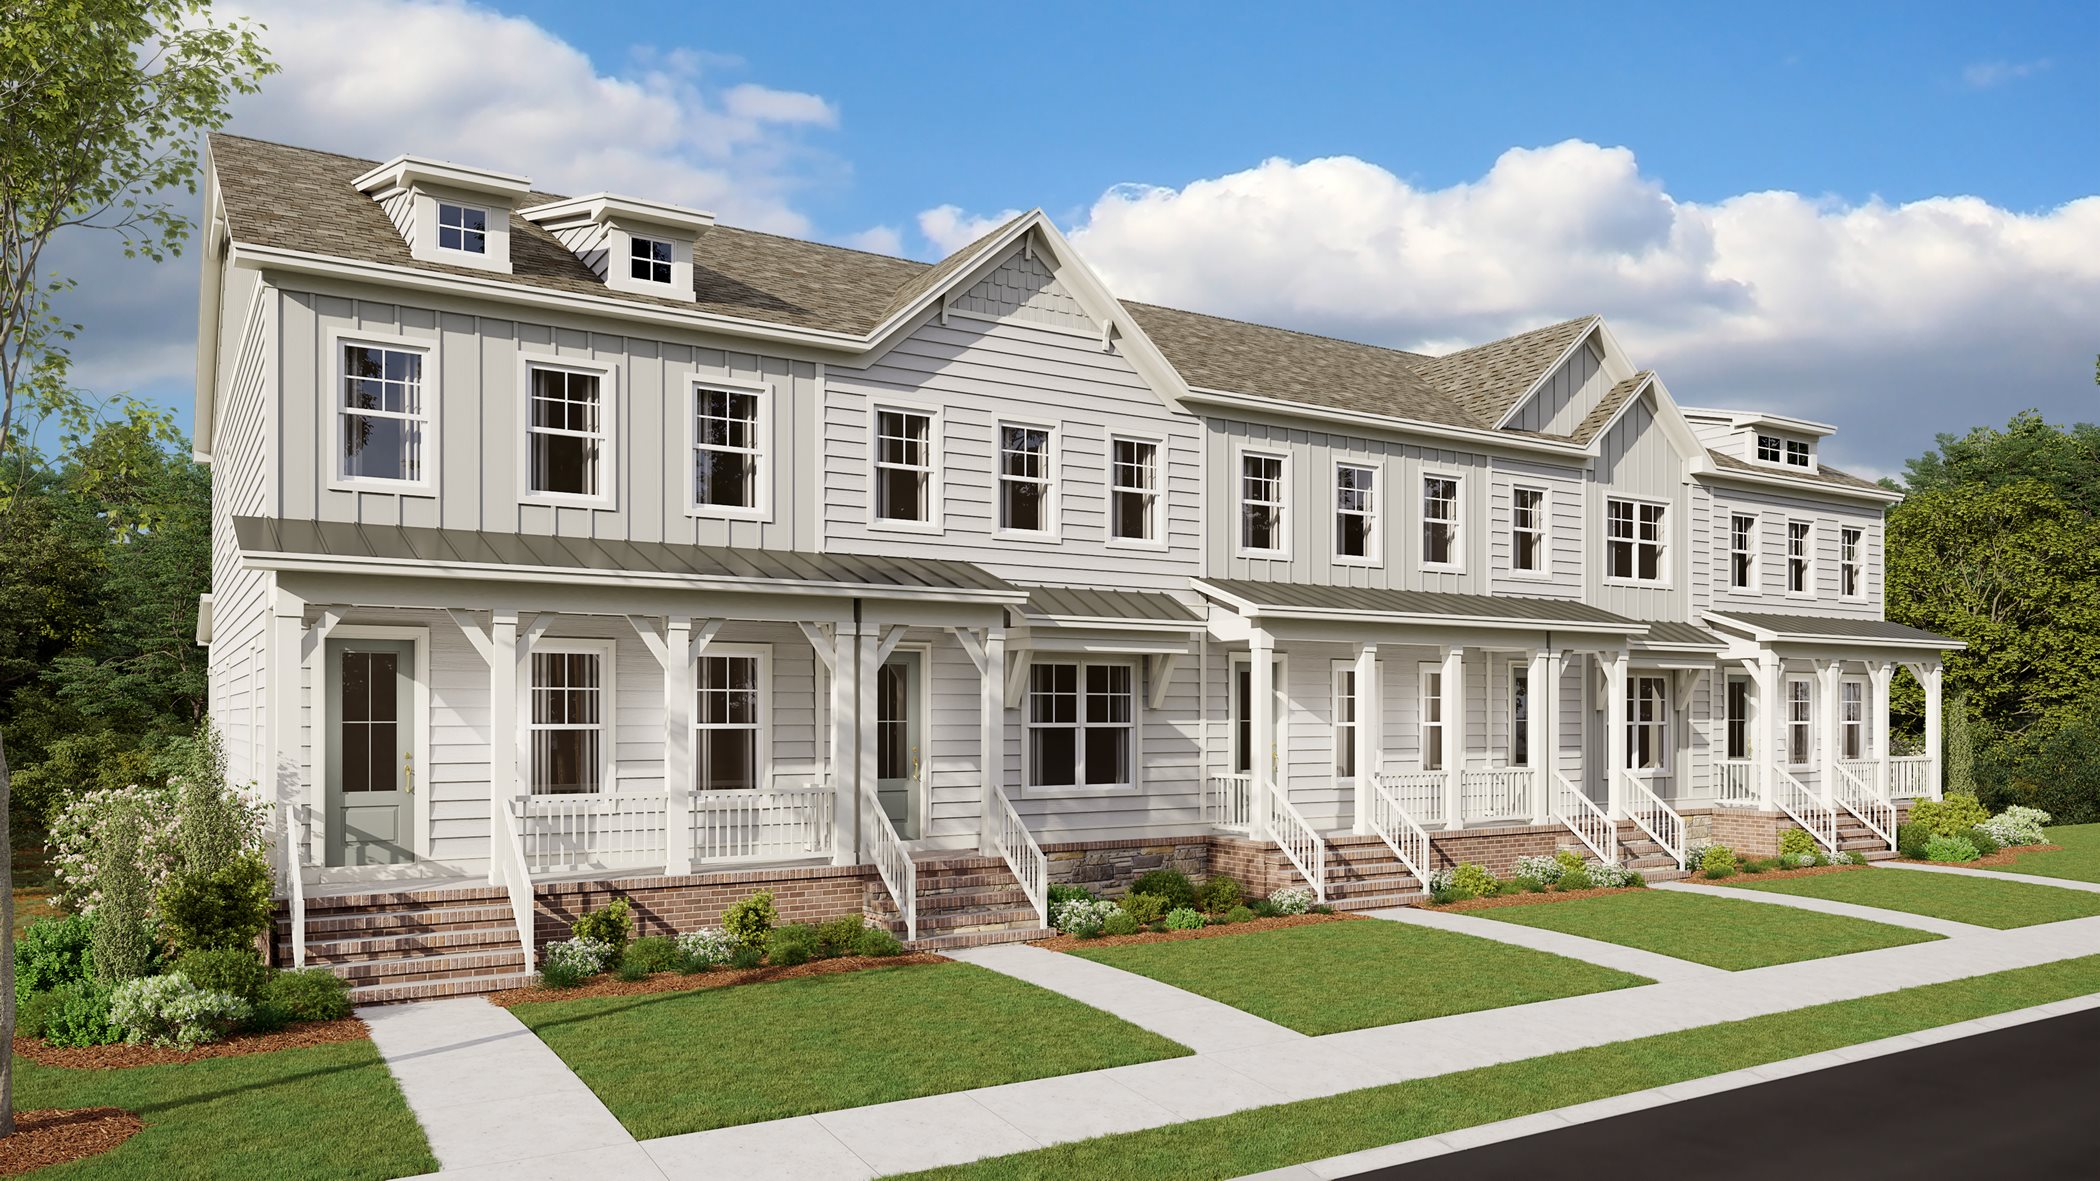 Exterior rendering of Preston townhomes in Trinity Park